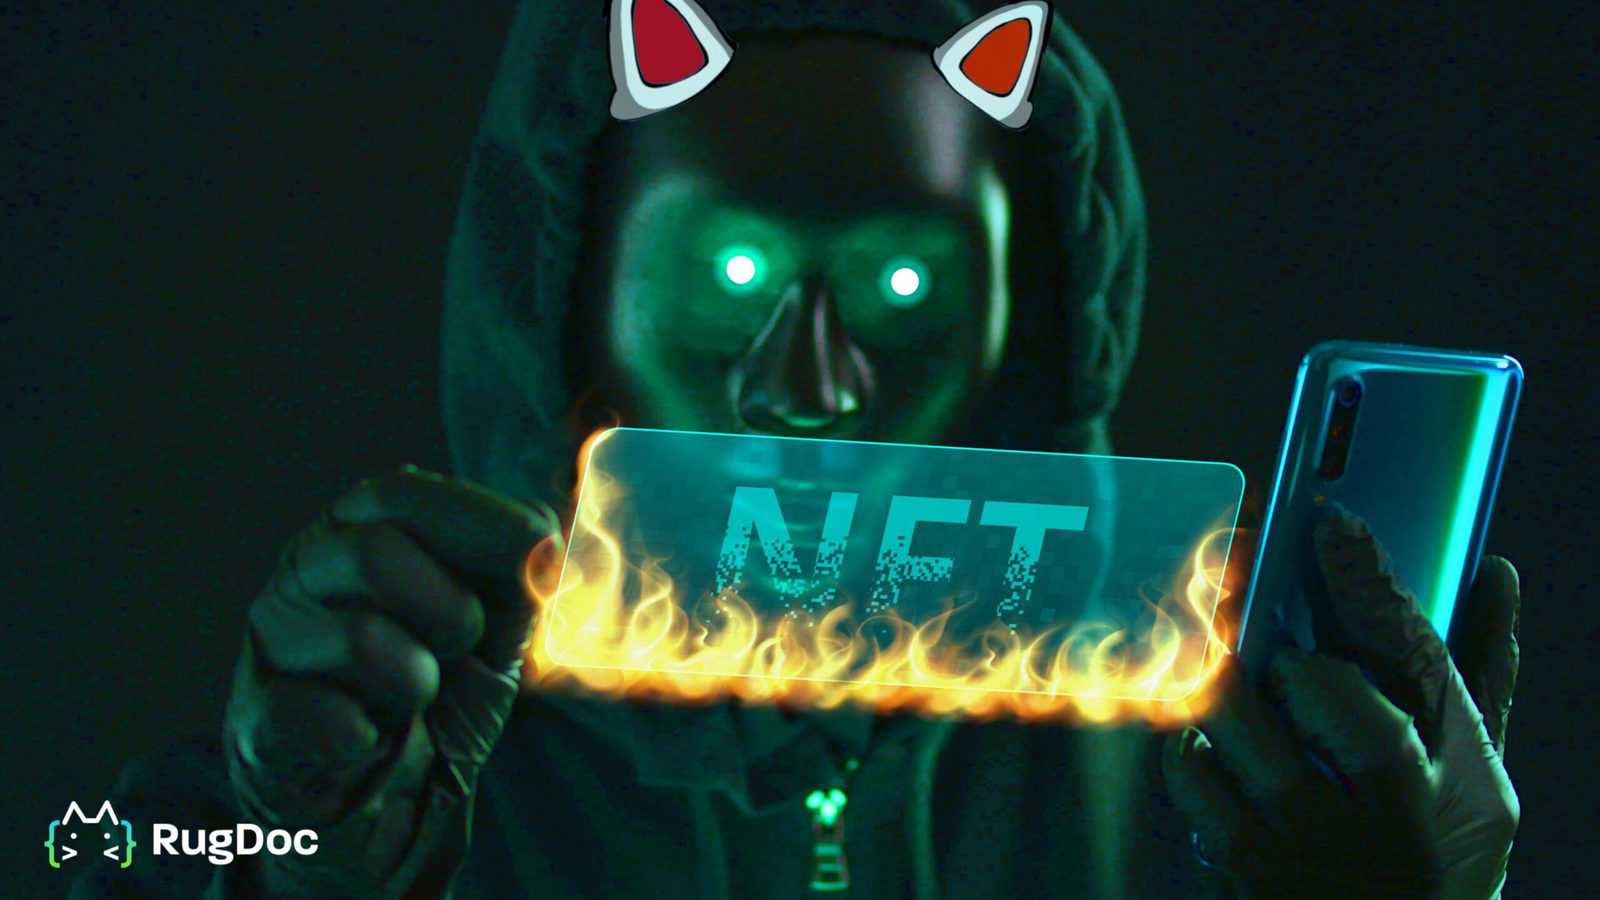 Hacker wearing dark mask pulls NFT of Non-Fungible Token text tab out of a smartphone. Modern blockchain technology concept